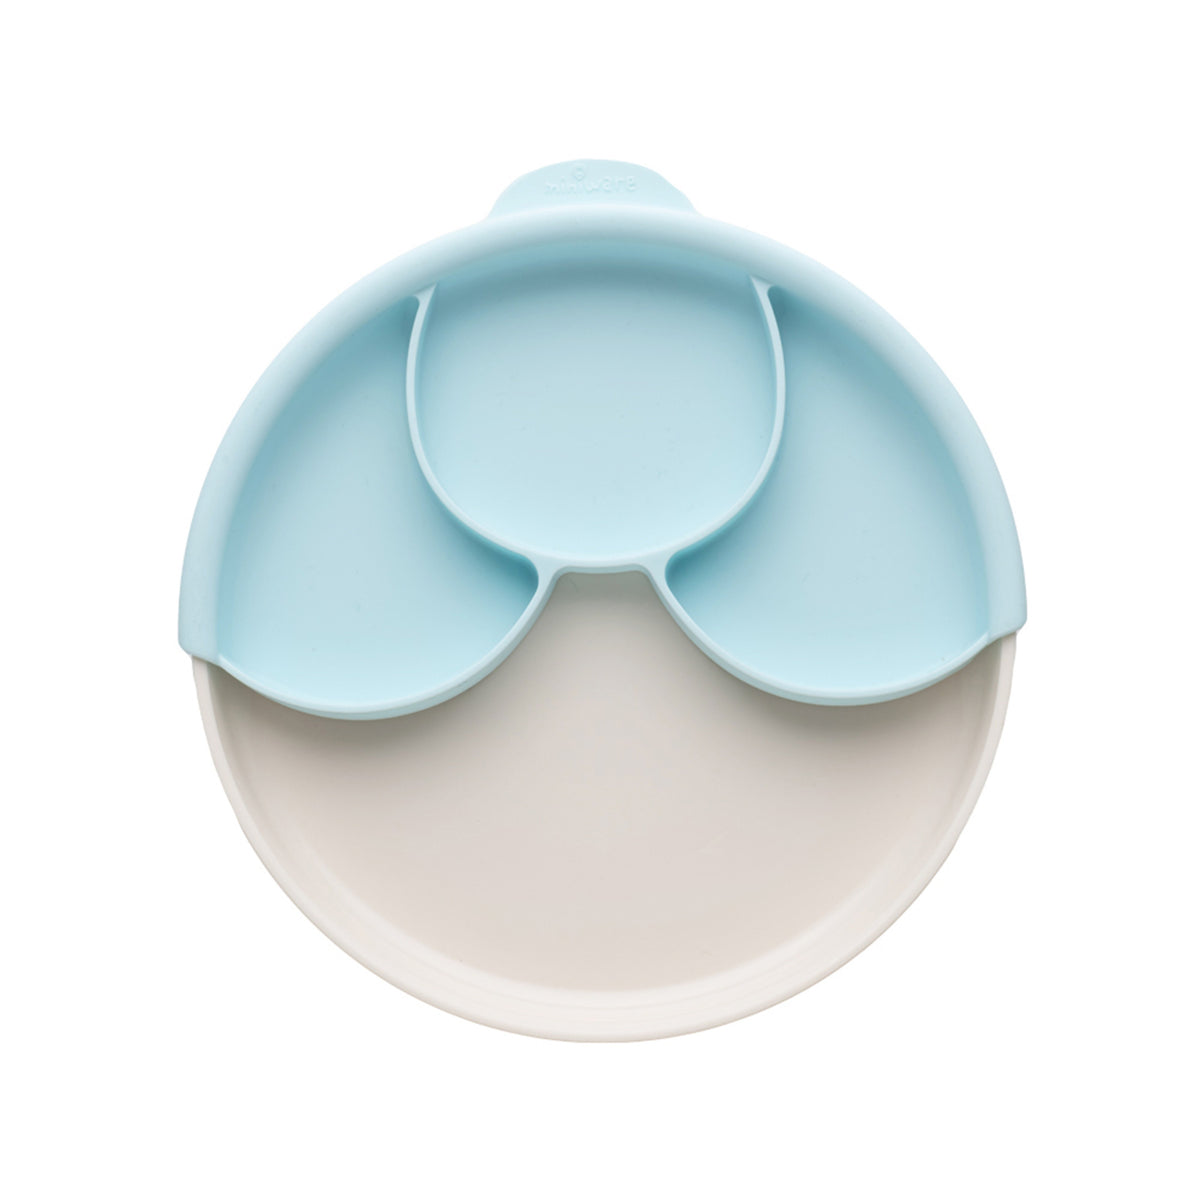 miniware-healthy-meal-set-pla-smart-divider-suction-plate-in-vanilla-silicone-divider-in-aqua- (1)